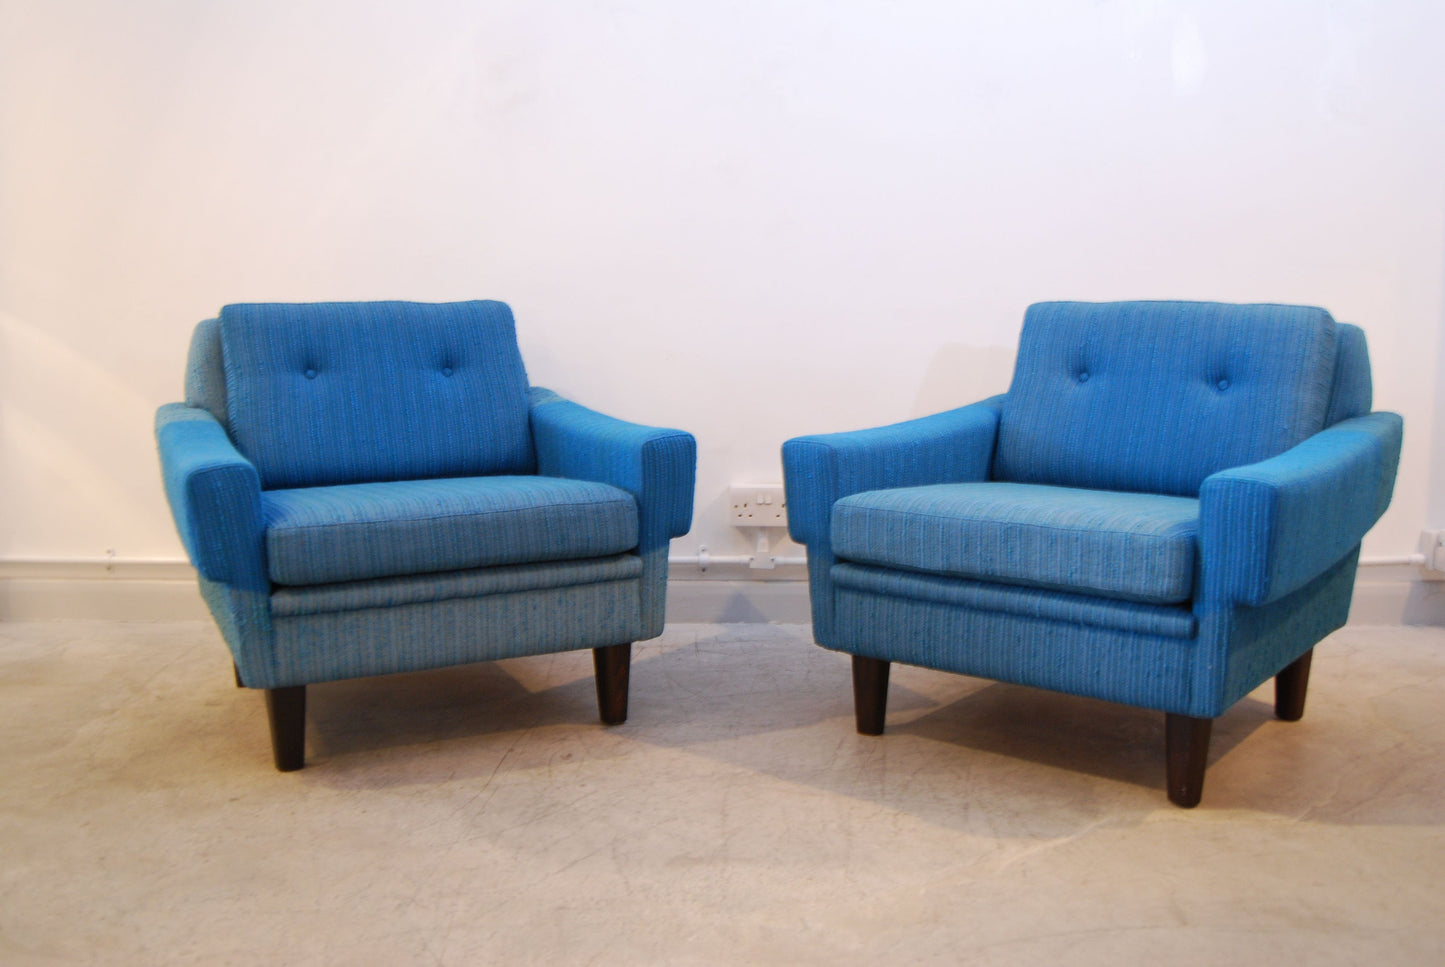 Pair of sea blue lounge chairs